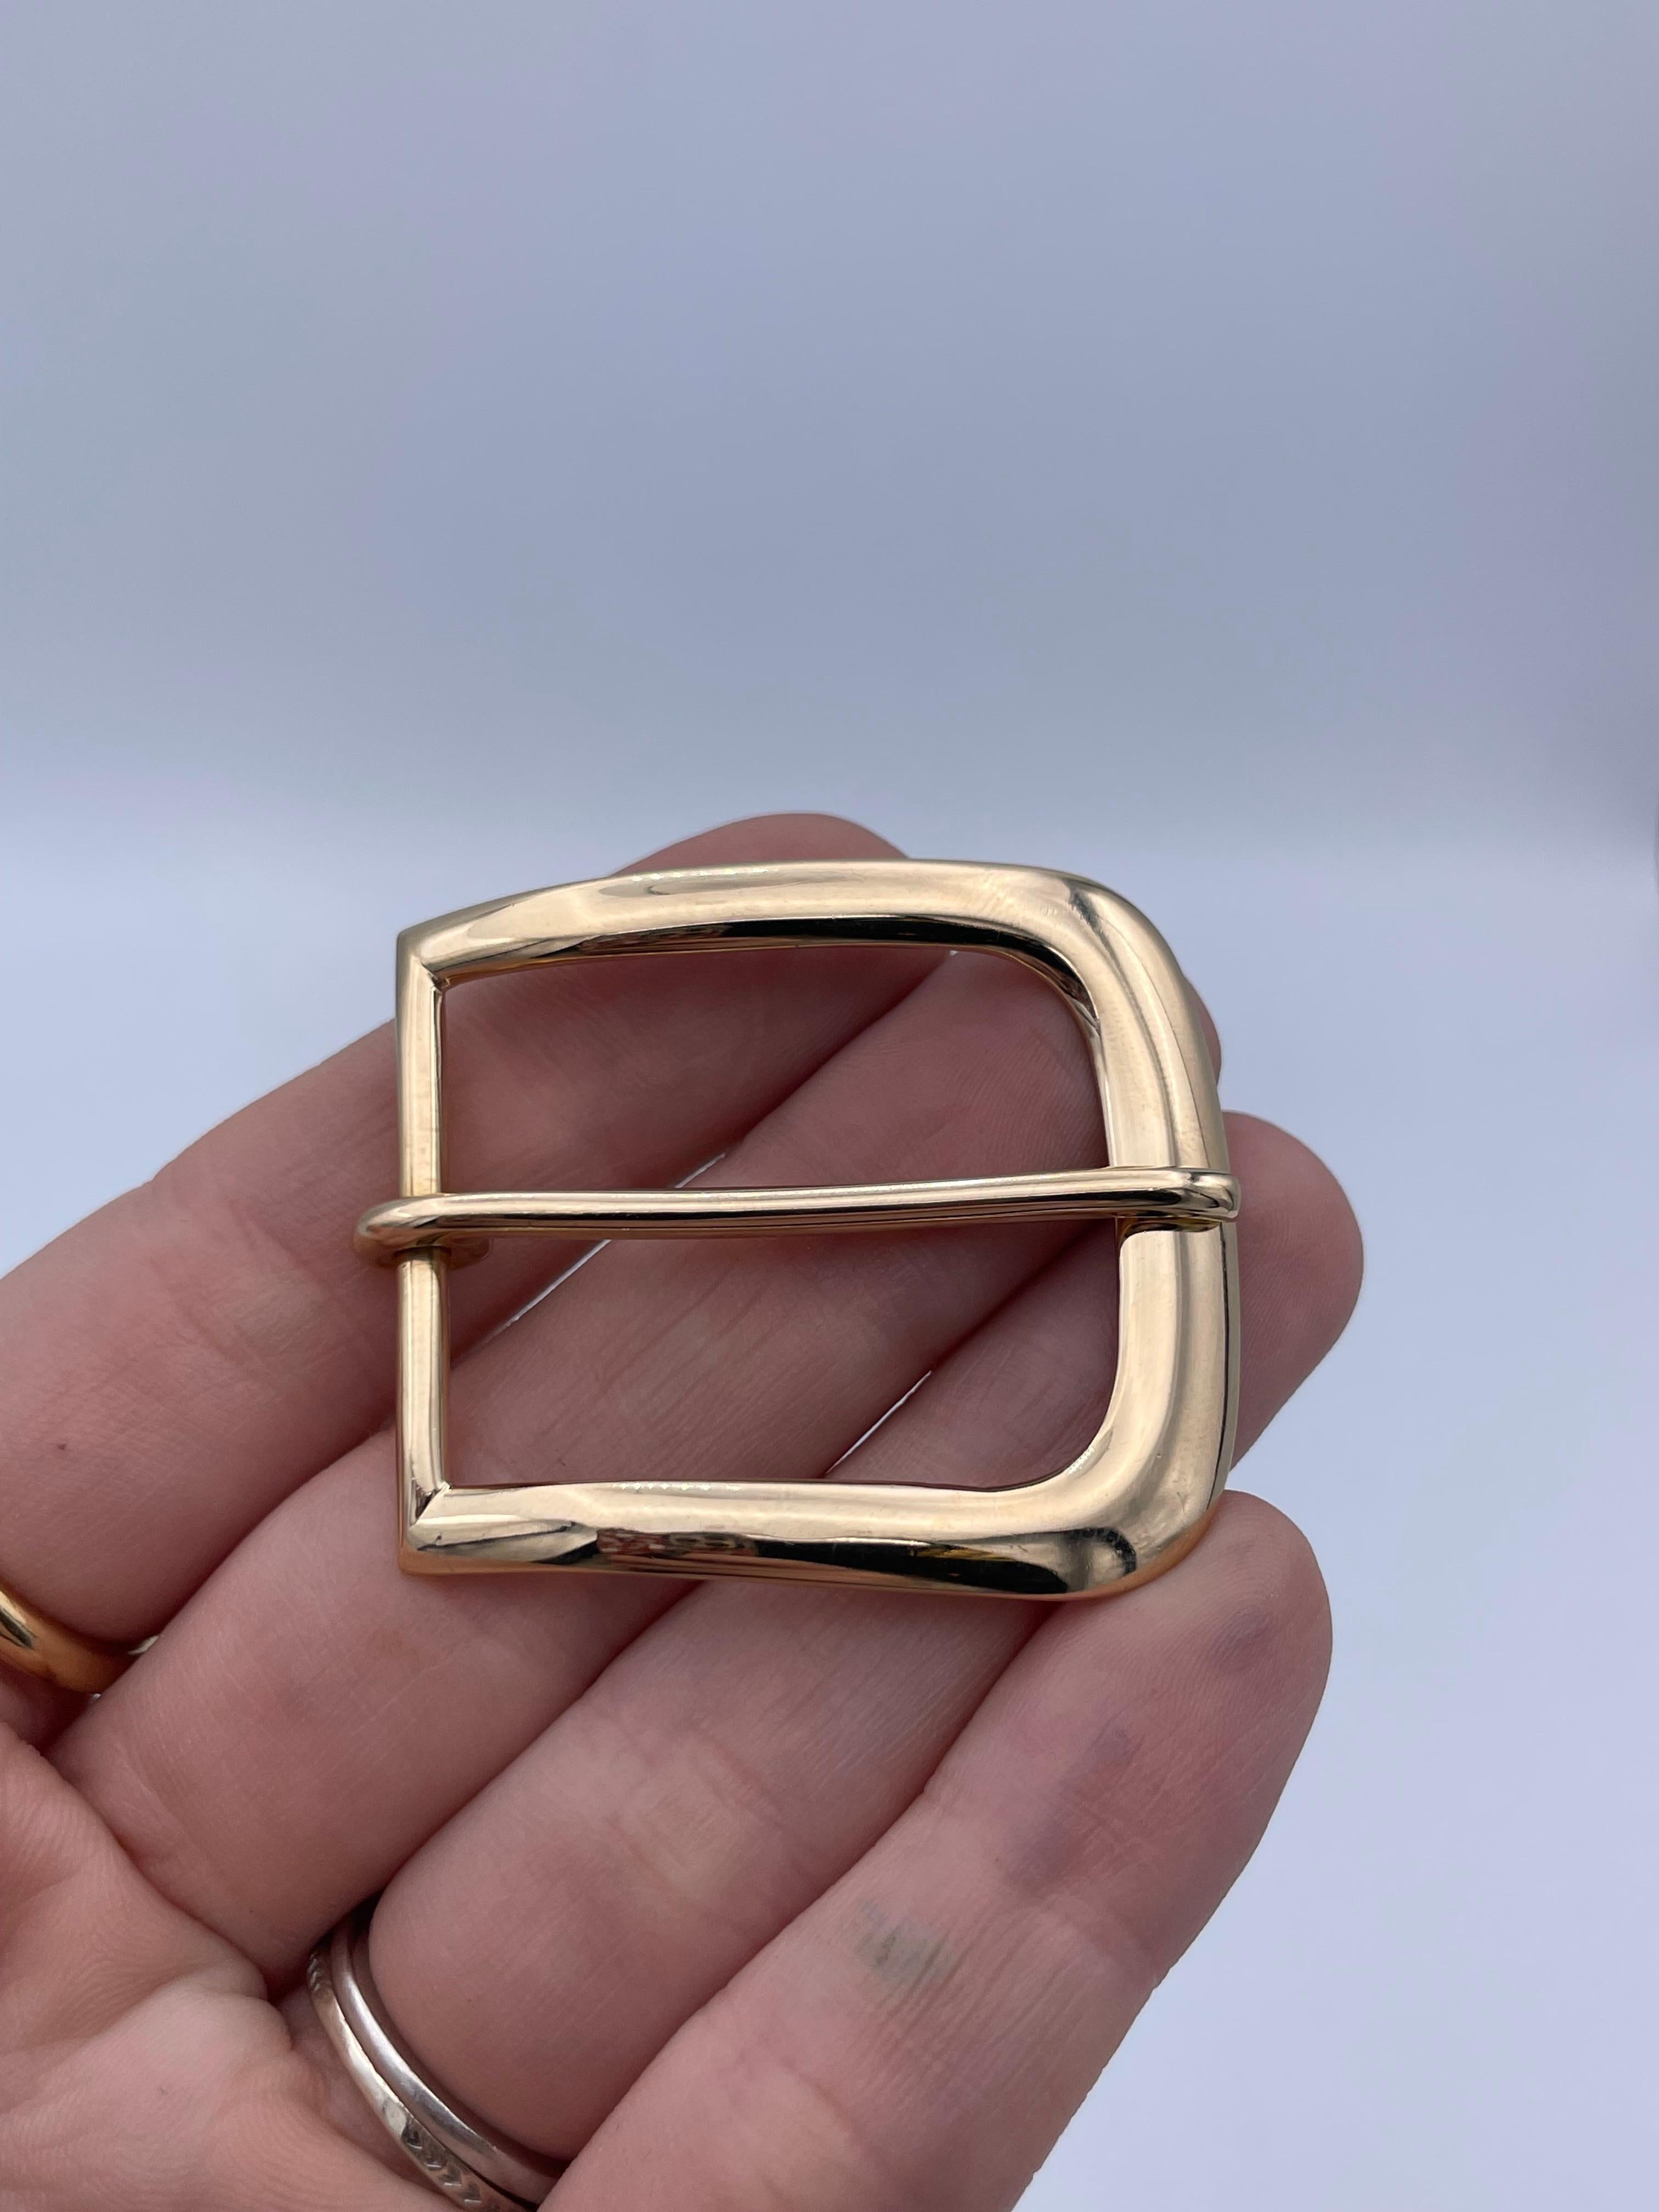 Gold belt buckle.  Made, signed and numbered by TIFFANY & CO.  Extra heavy gauge 14K yellow gold.  1 5/8